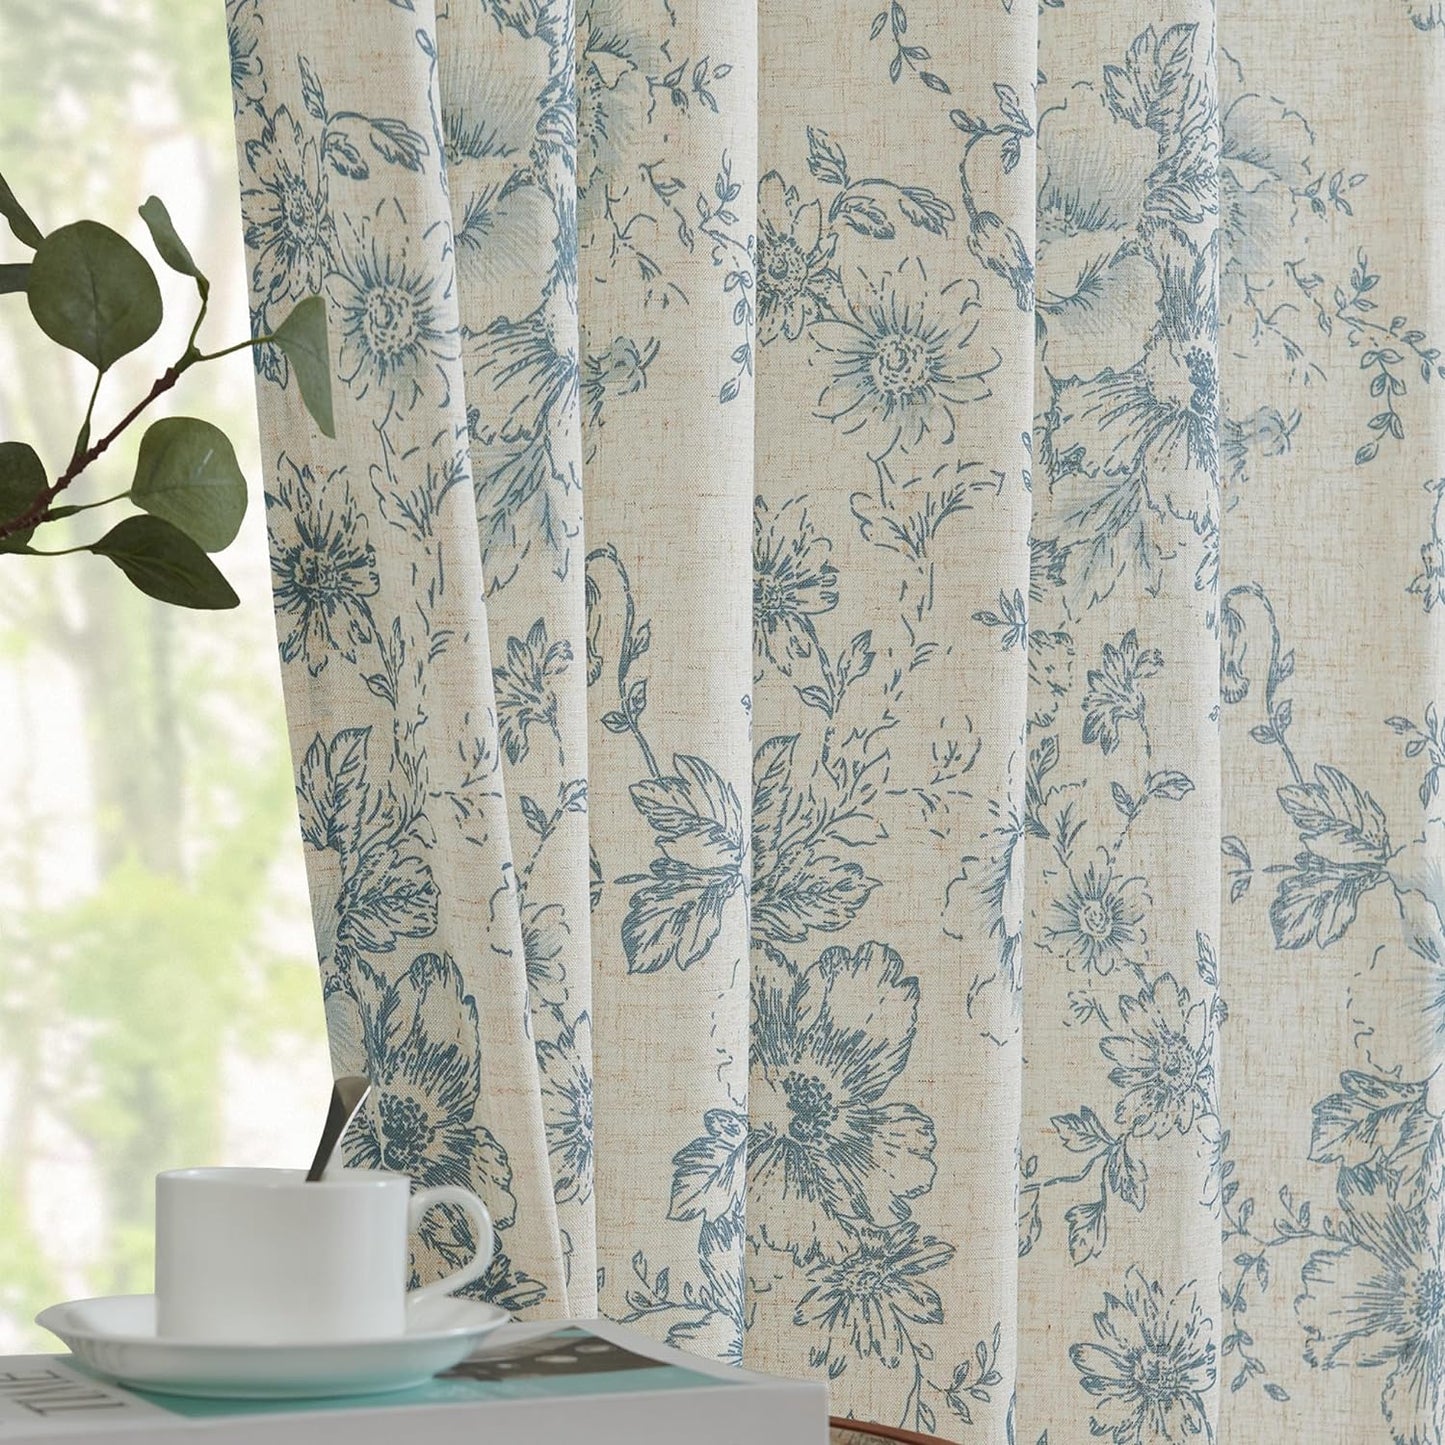 Jinchan Linen Curtains Floral Curtains for Living Room 84 Inch Length Black Printed Curtains Rod Pocket Back Tab Farmhouse Peony Flower Patterned Drapes Bedroom Window Curtain Set 2 Panels  CKNY HOME FASHION Flower Blue 50"W X 90"L 